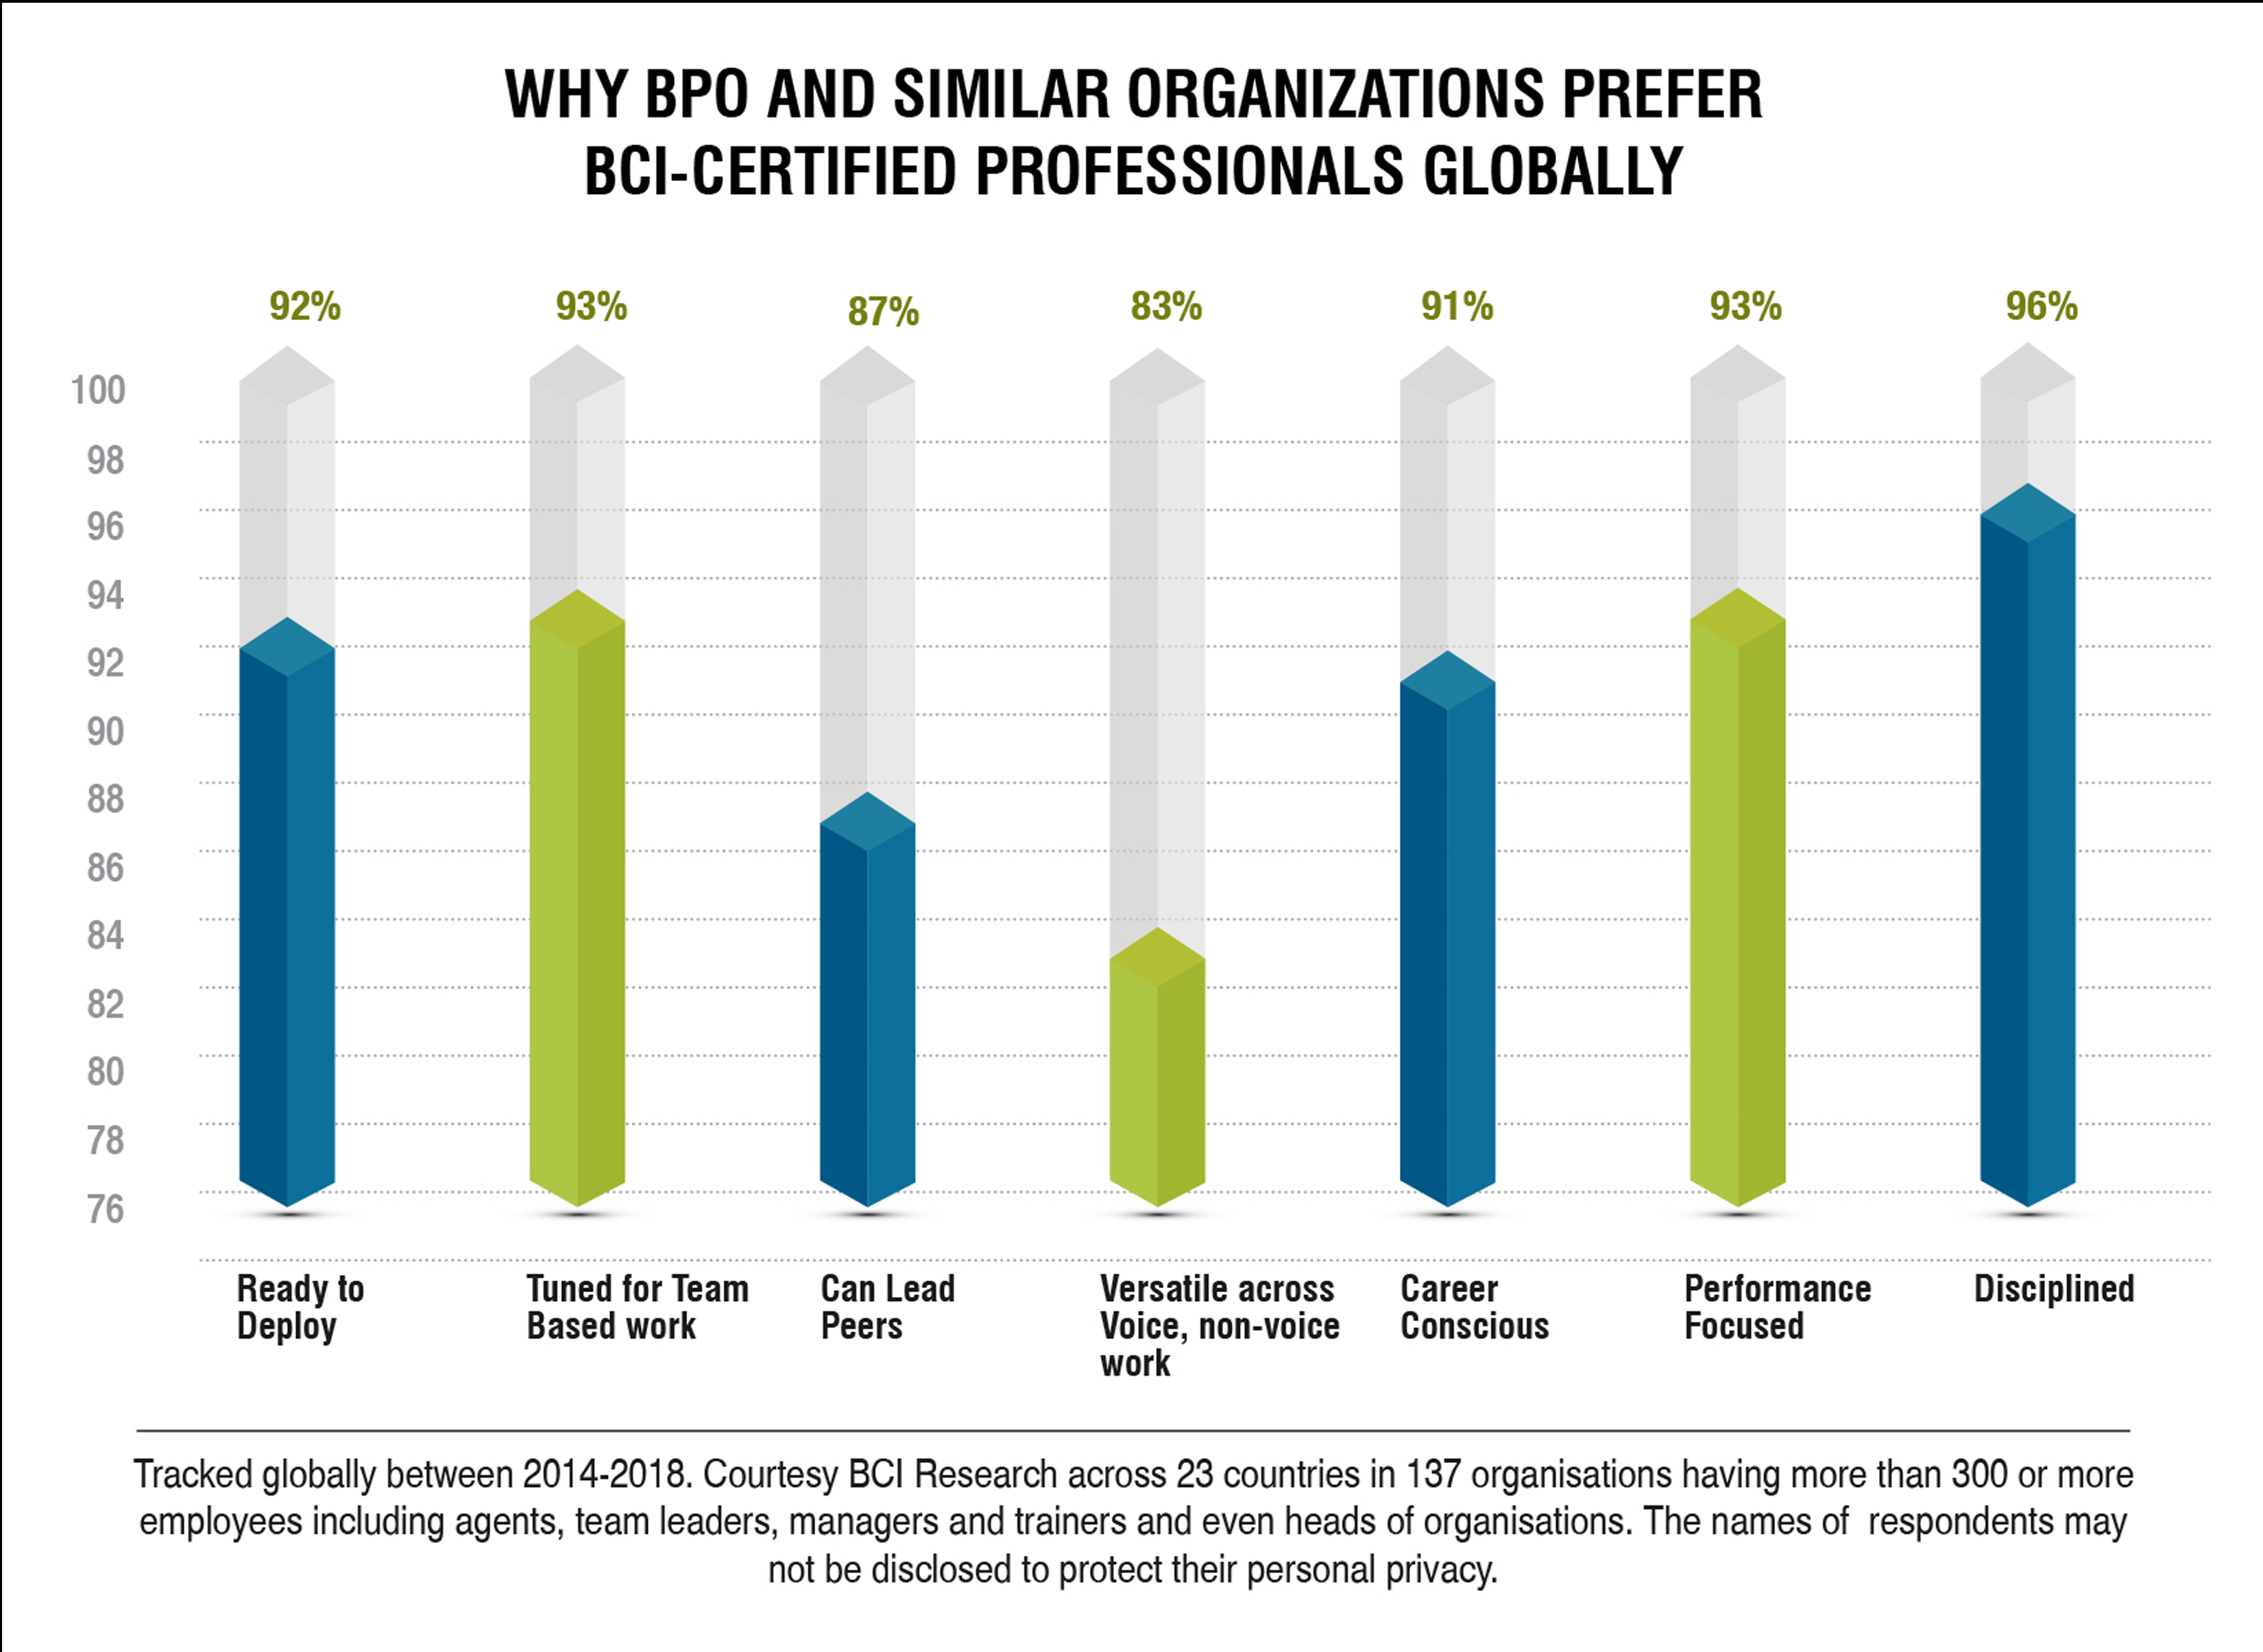 Why BPO and similar organizations prefer BCI-Certified professionals globally